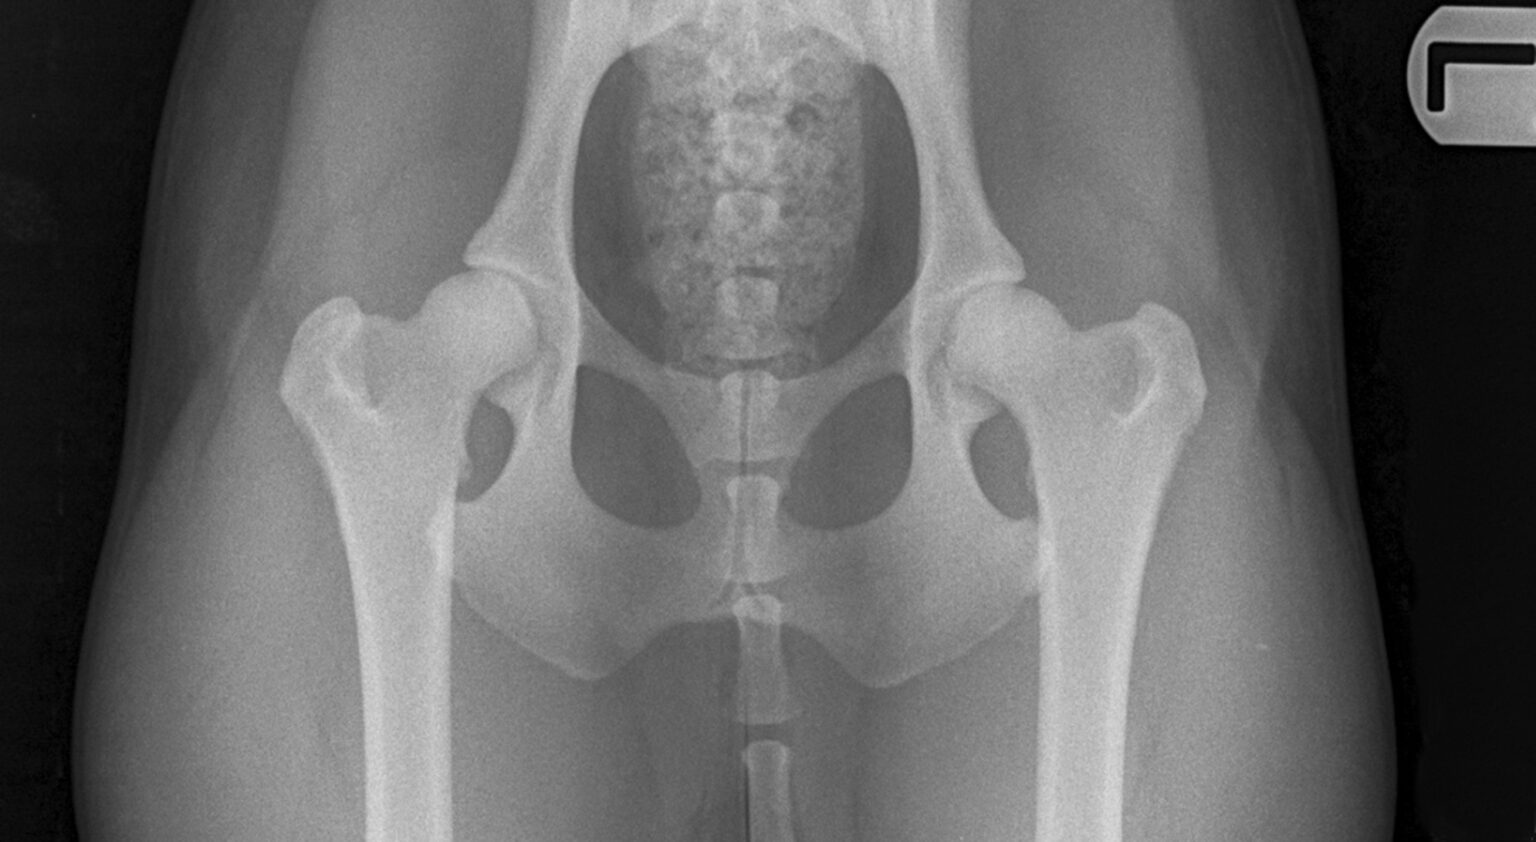 xray images of normal male hips